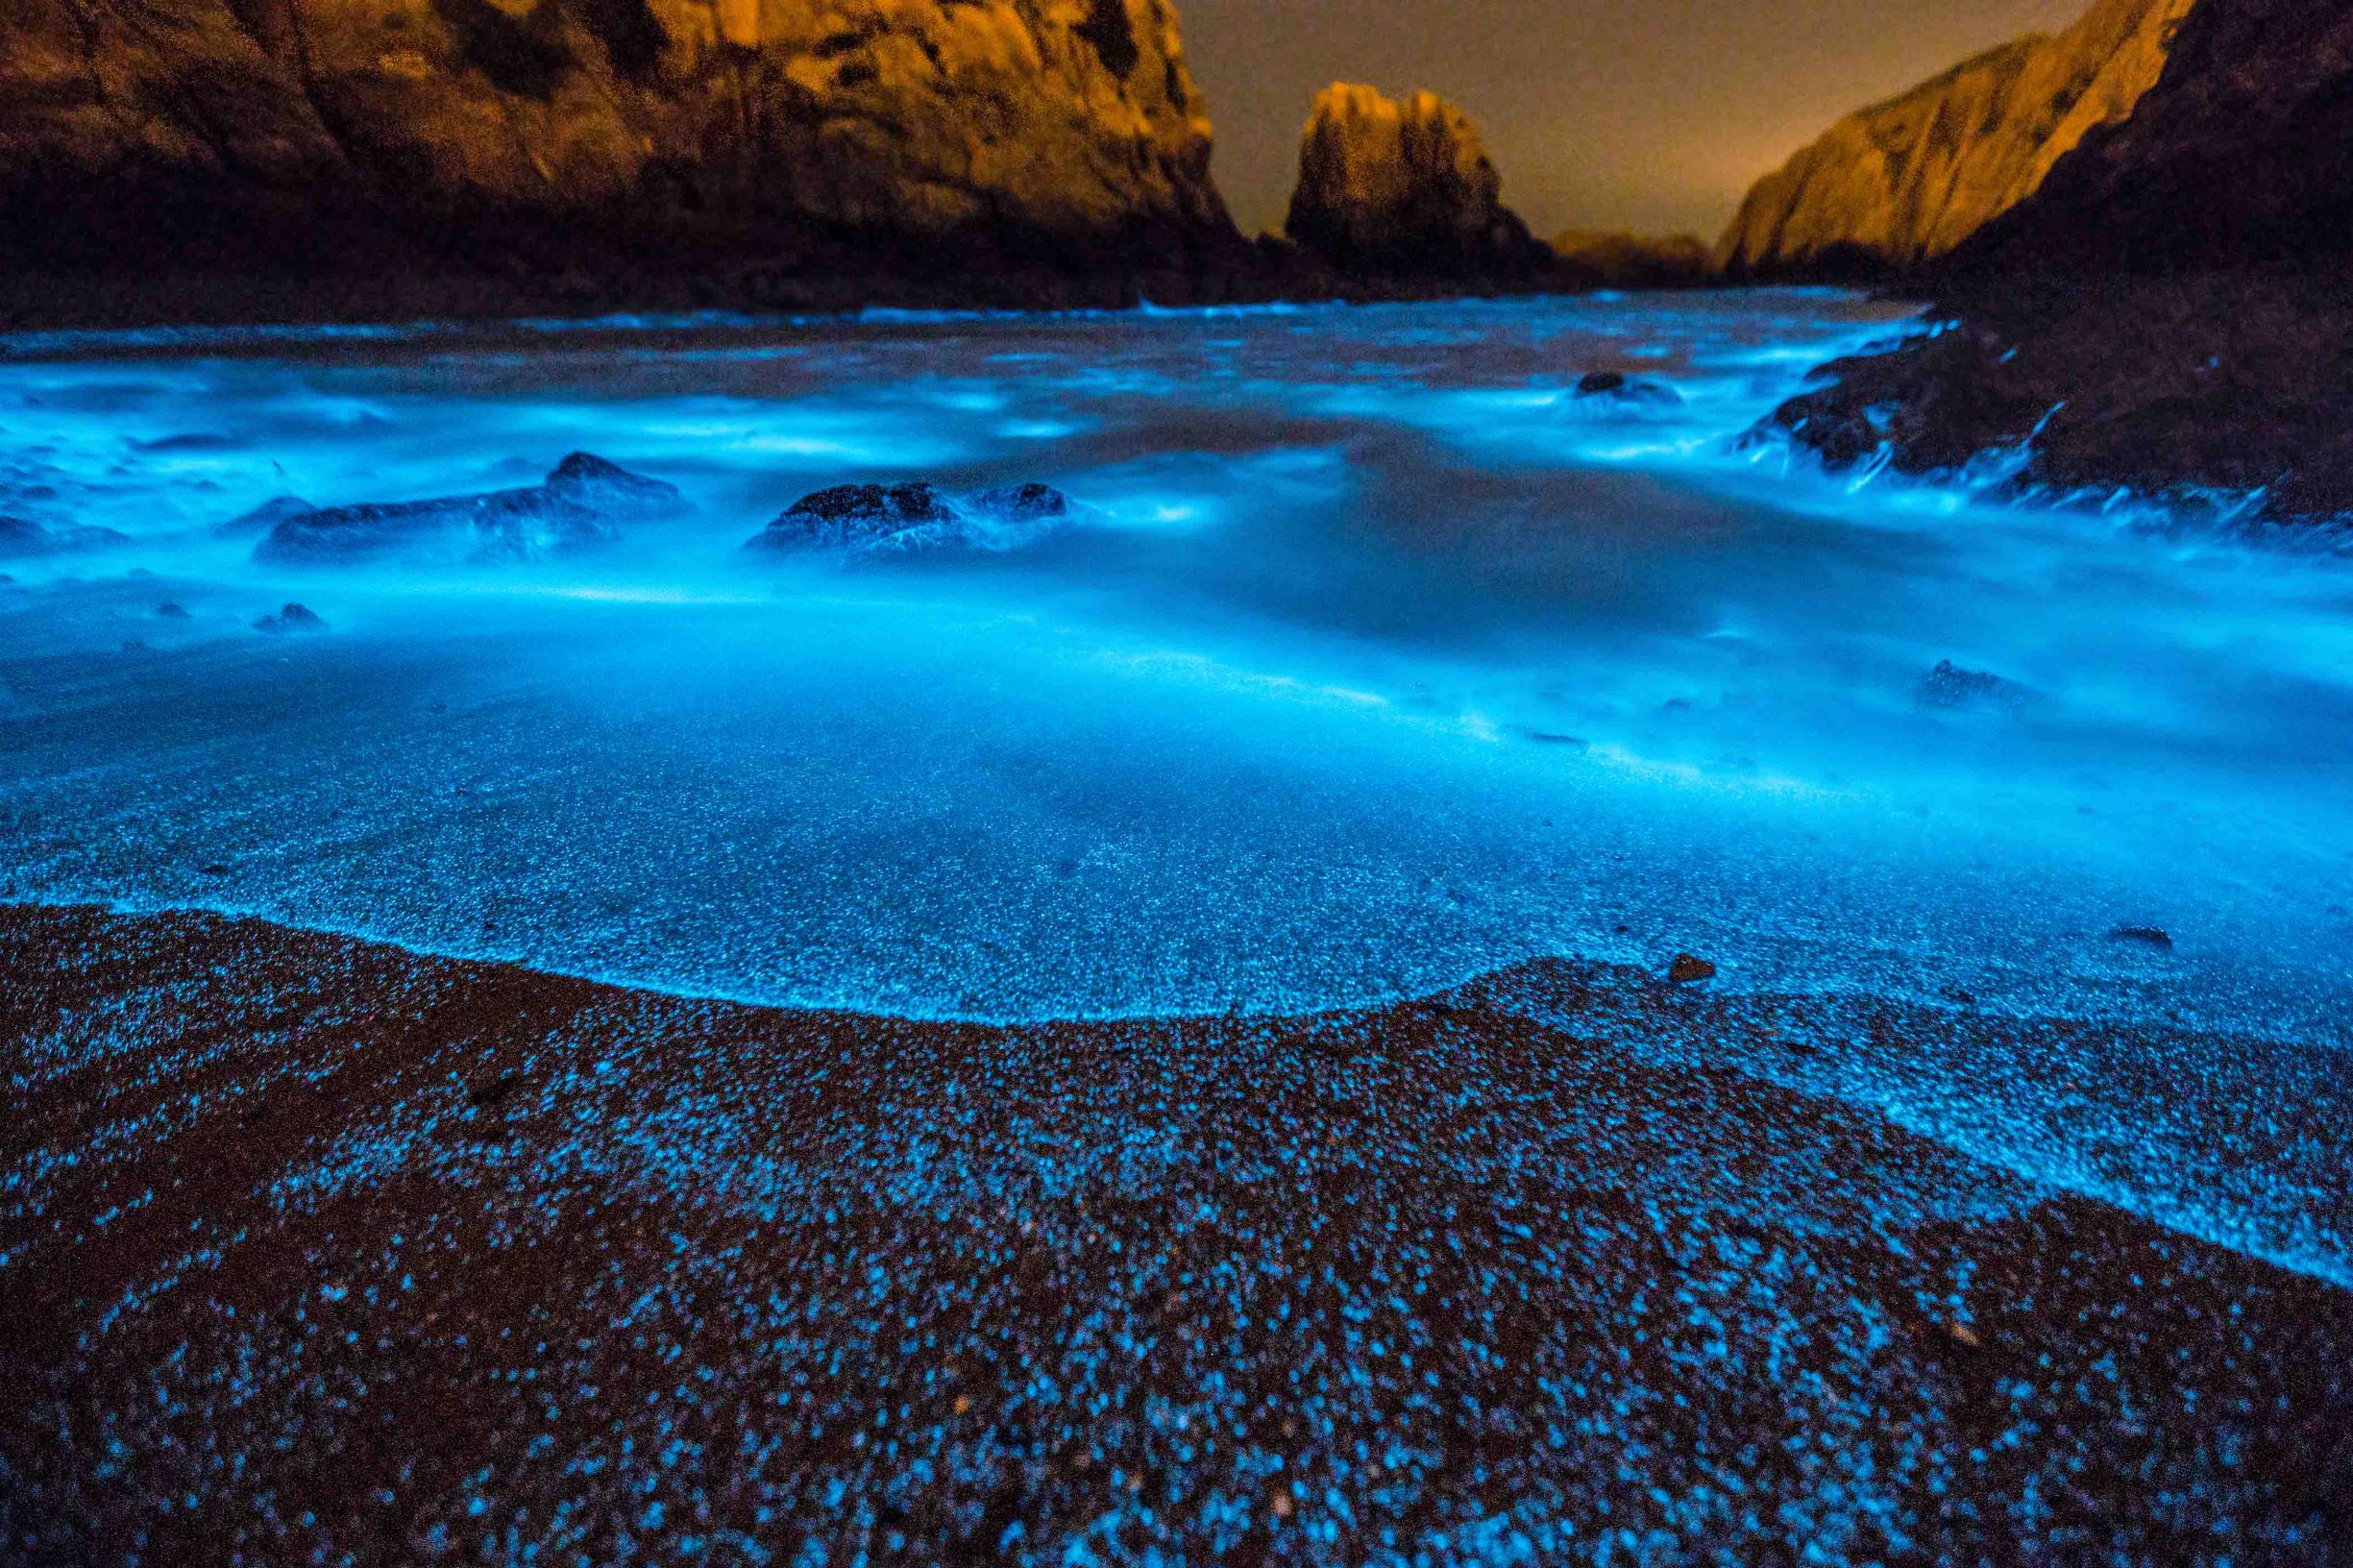 China’s sparkling bioluminescent seas are glowing brighter